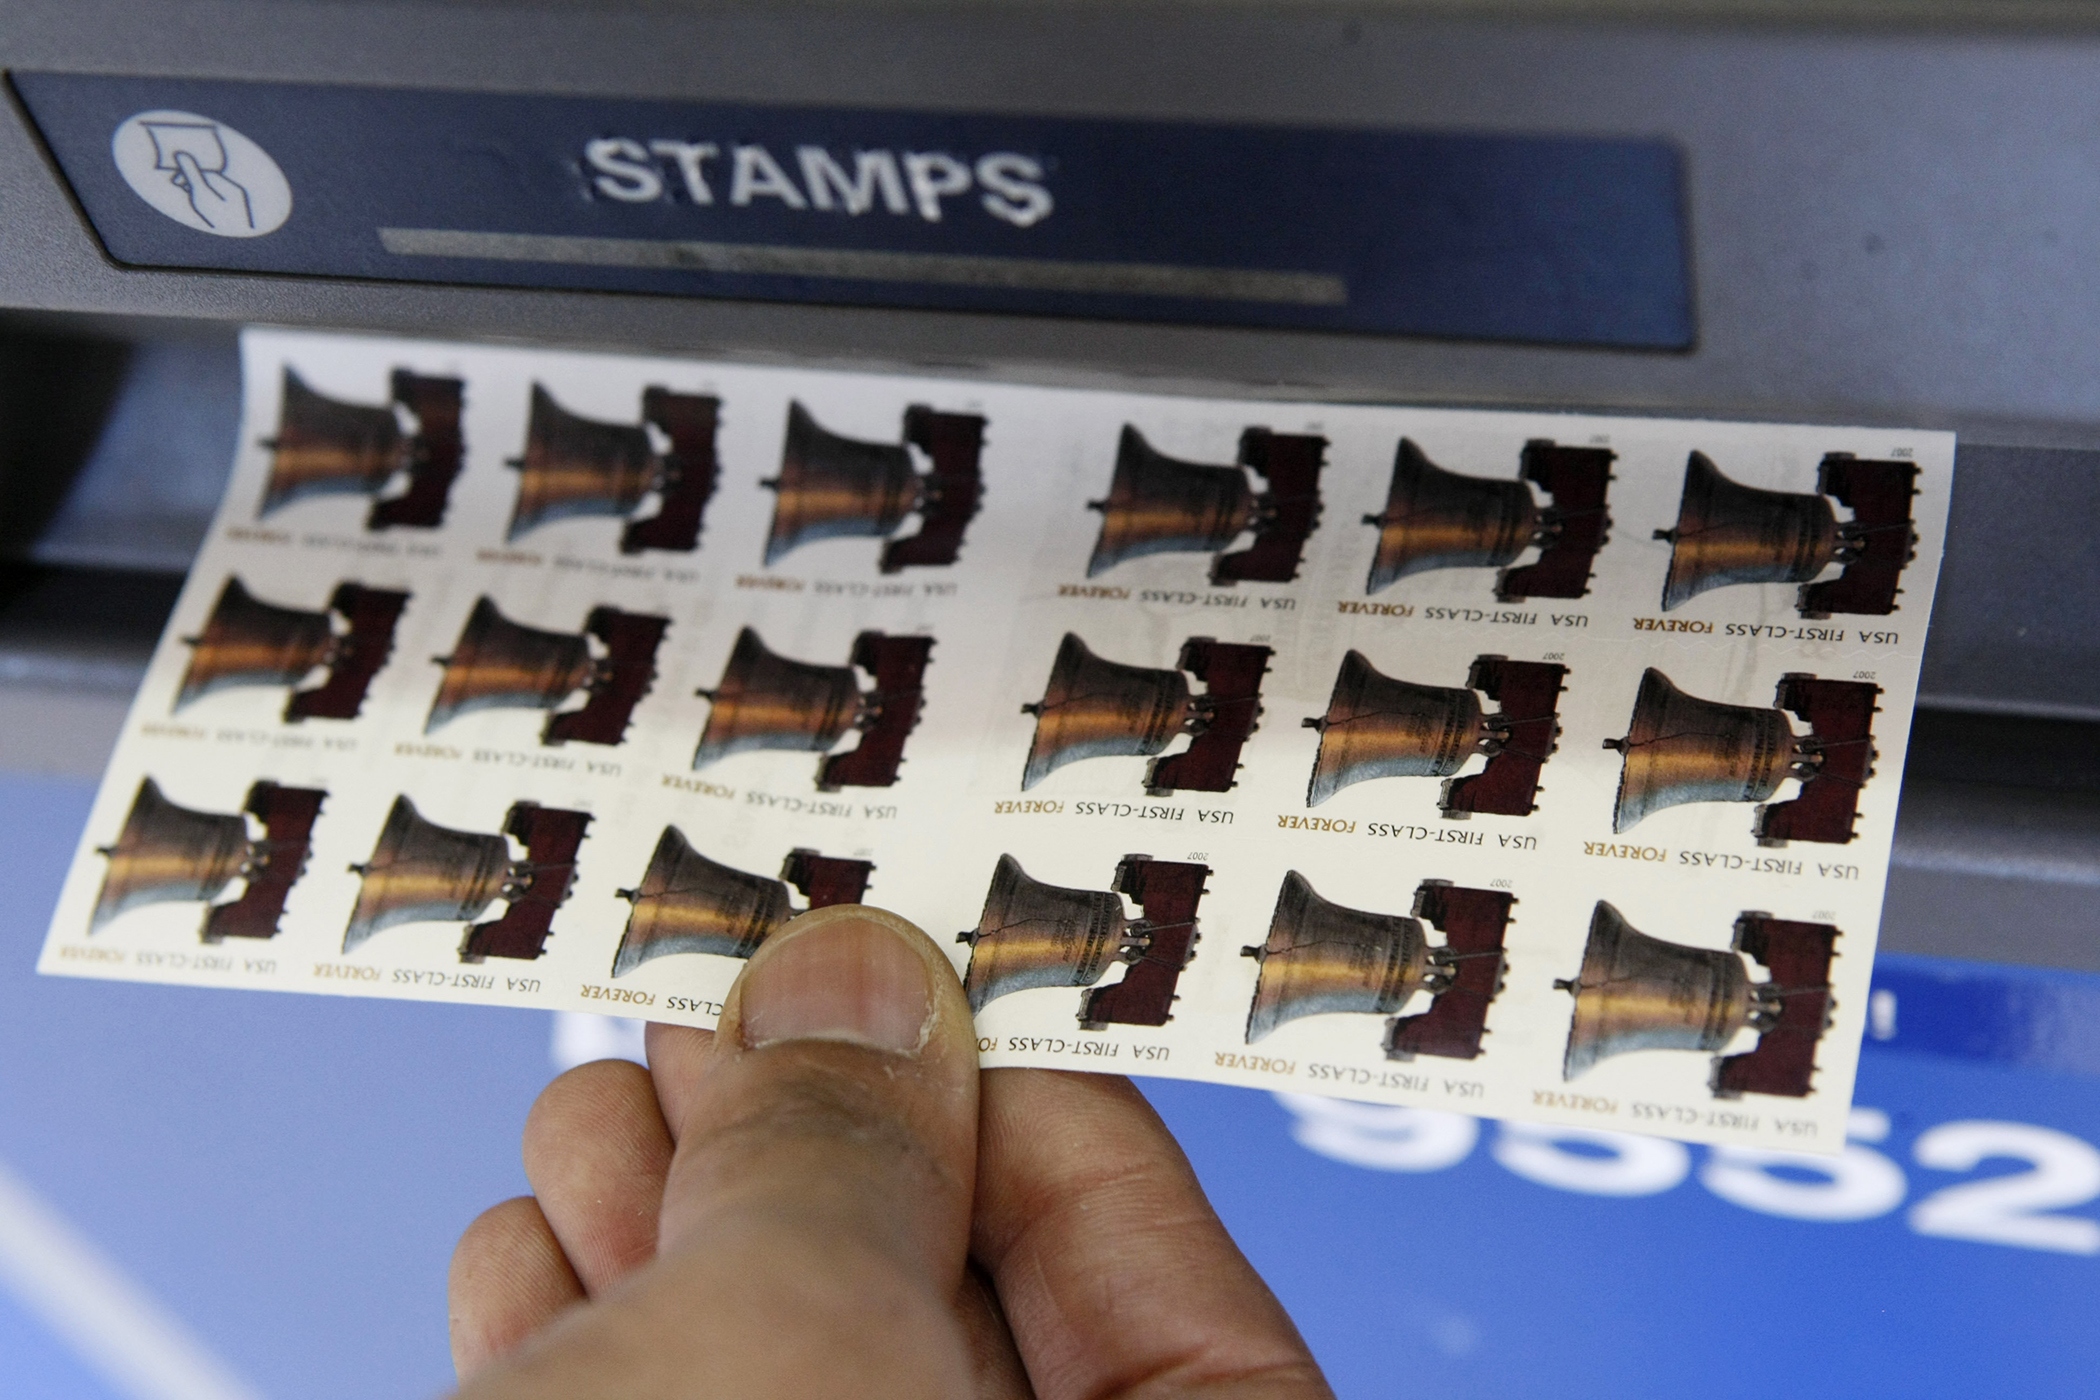 How My Bet on "Forever Stamps" Went So Terribly Wrong